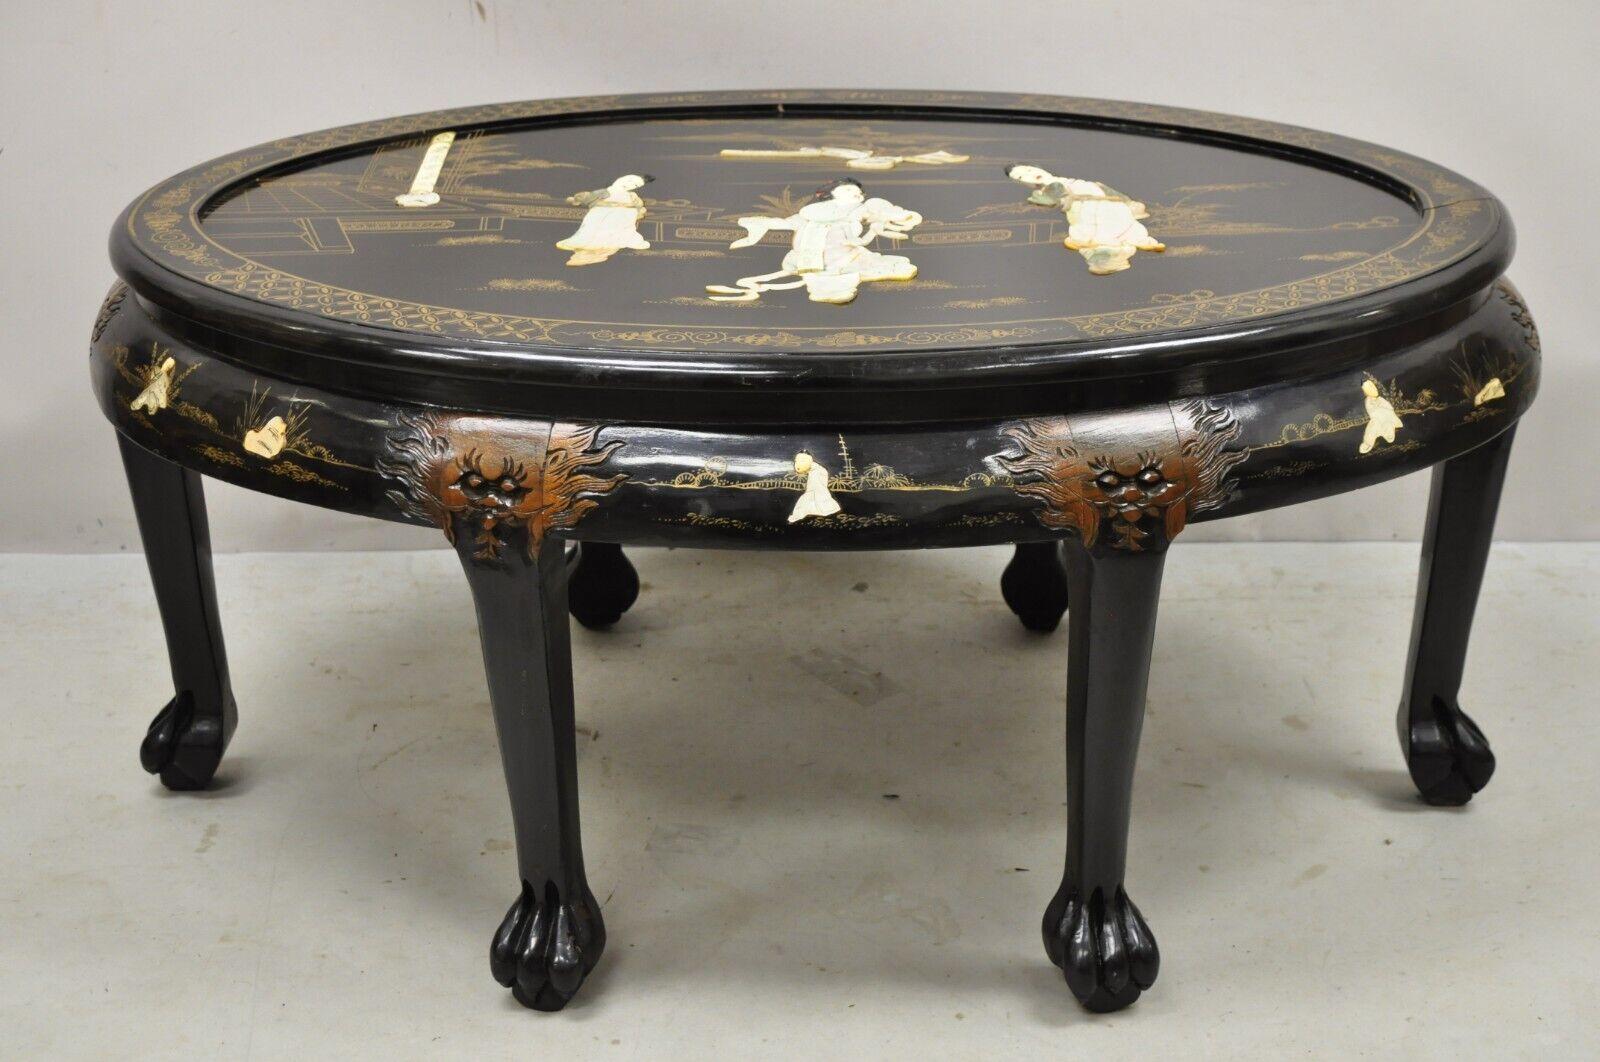 Vintage Chinese Black Lacquer Mother of Pearl Nesting Coffee Table Set - 6 Stools - A. Item features a custom oval glass top, black lacquer finish, mother of pearl figural inlay throughout, very nice vintage set, great style and form, listing